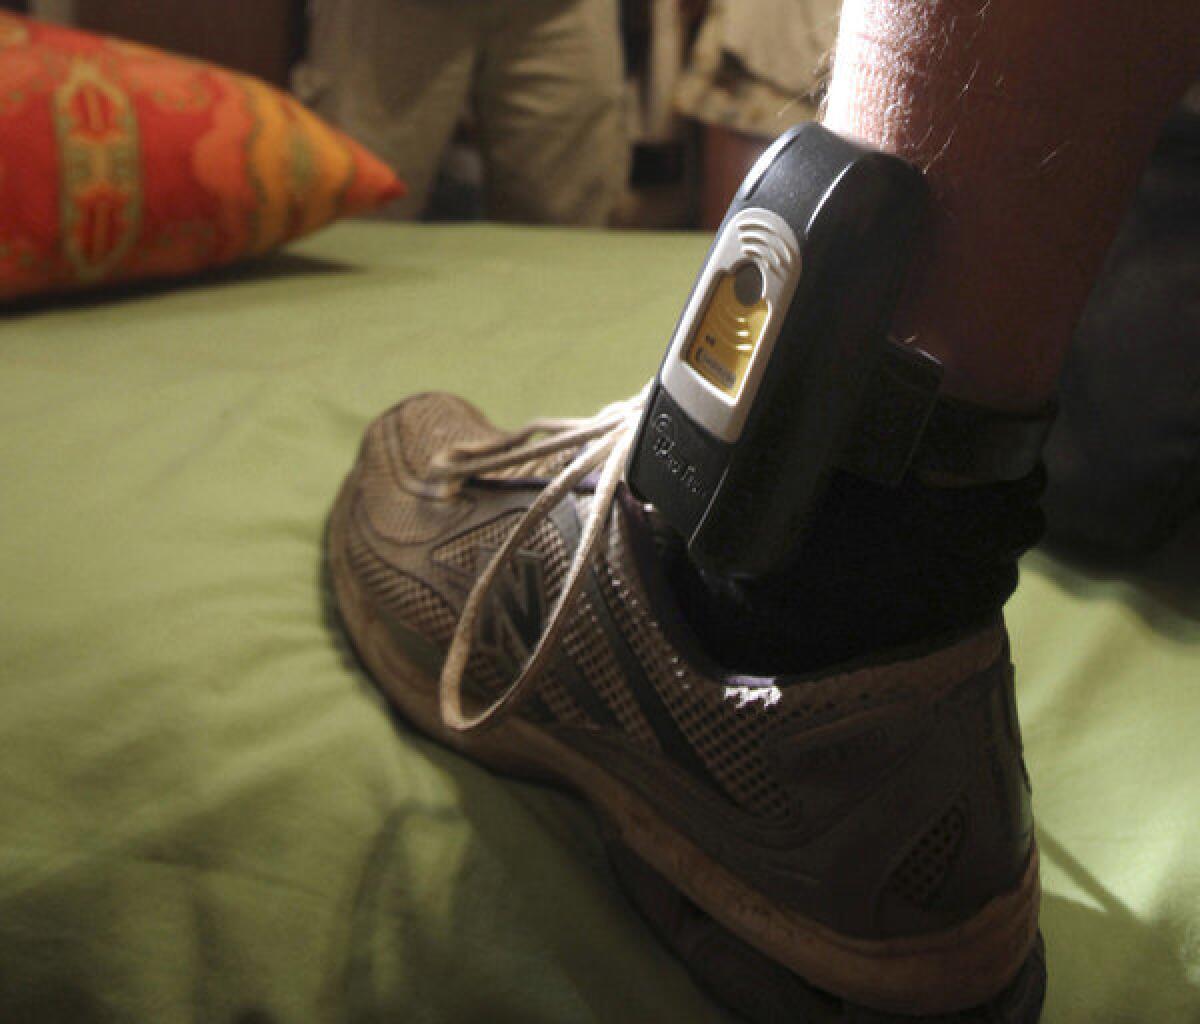 Probationers and defendants are often forced to wear electronic ankle bracelets.